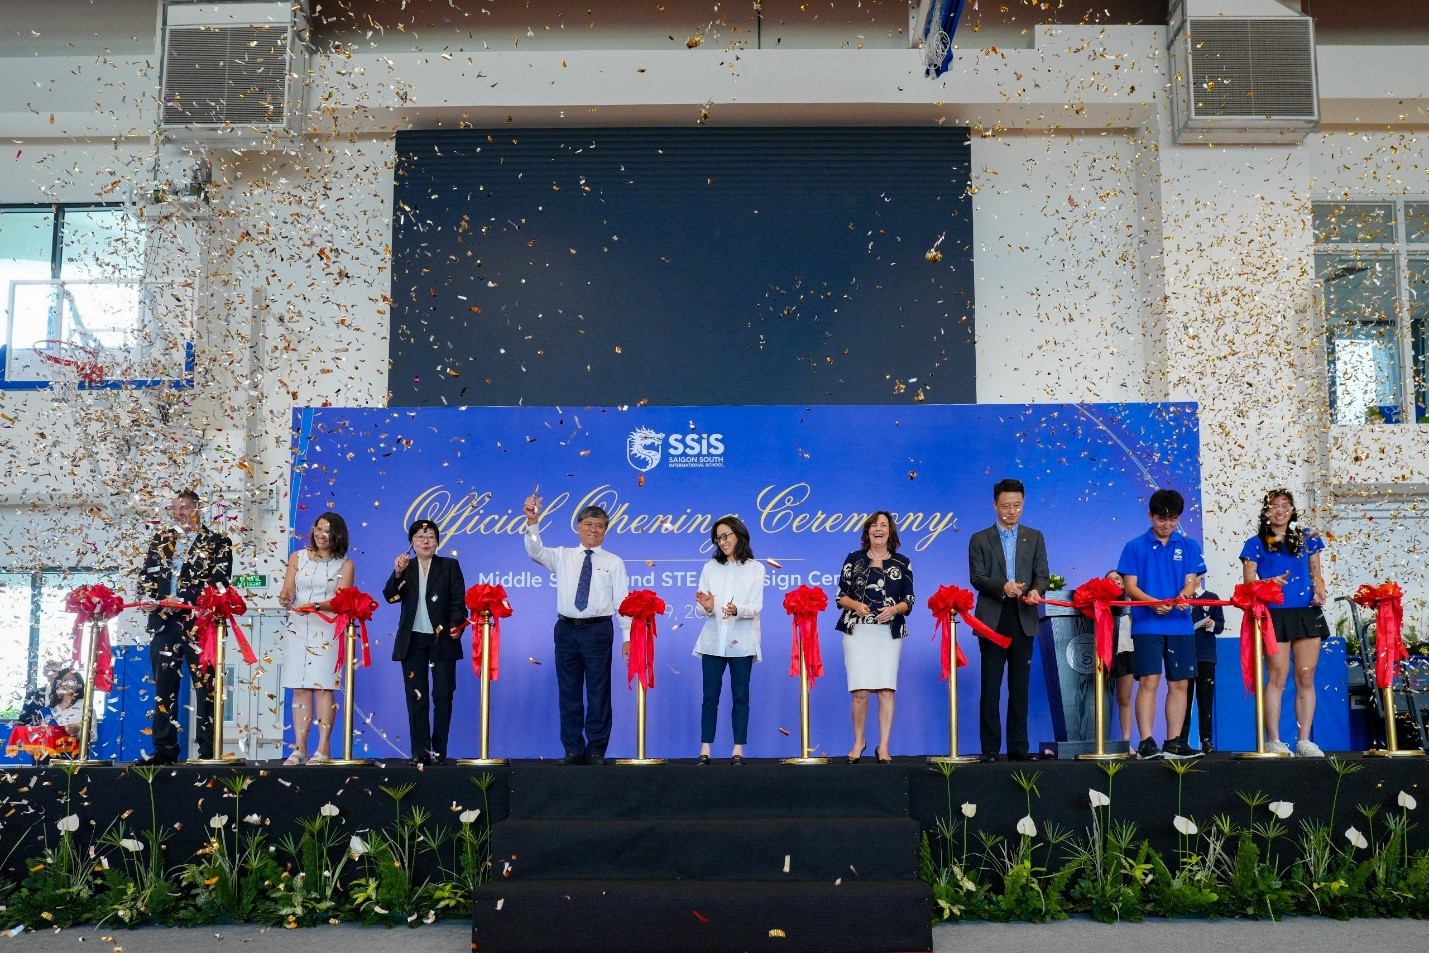 Saigon South International School invests in state-of-the-art facilities that promote STEAM education